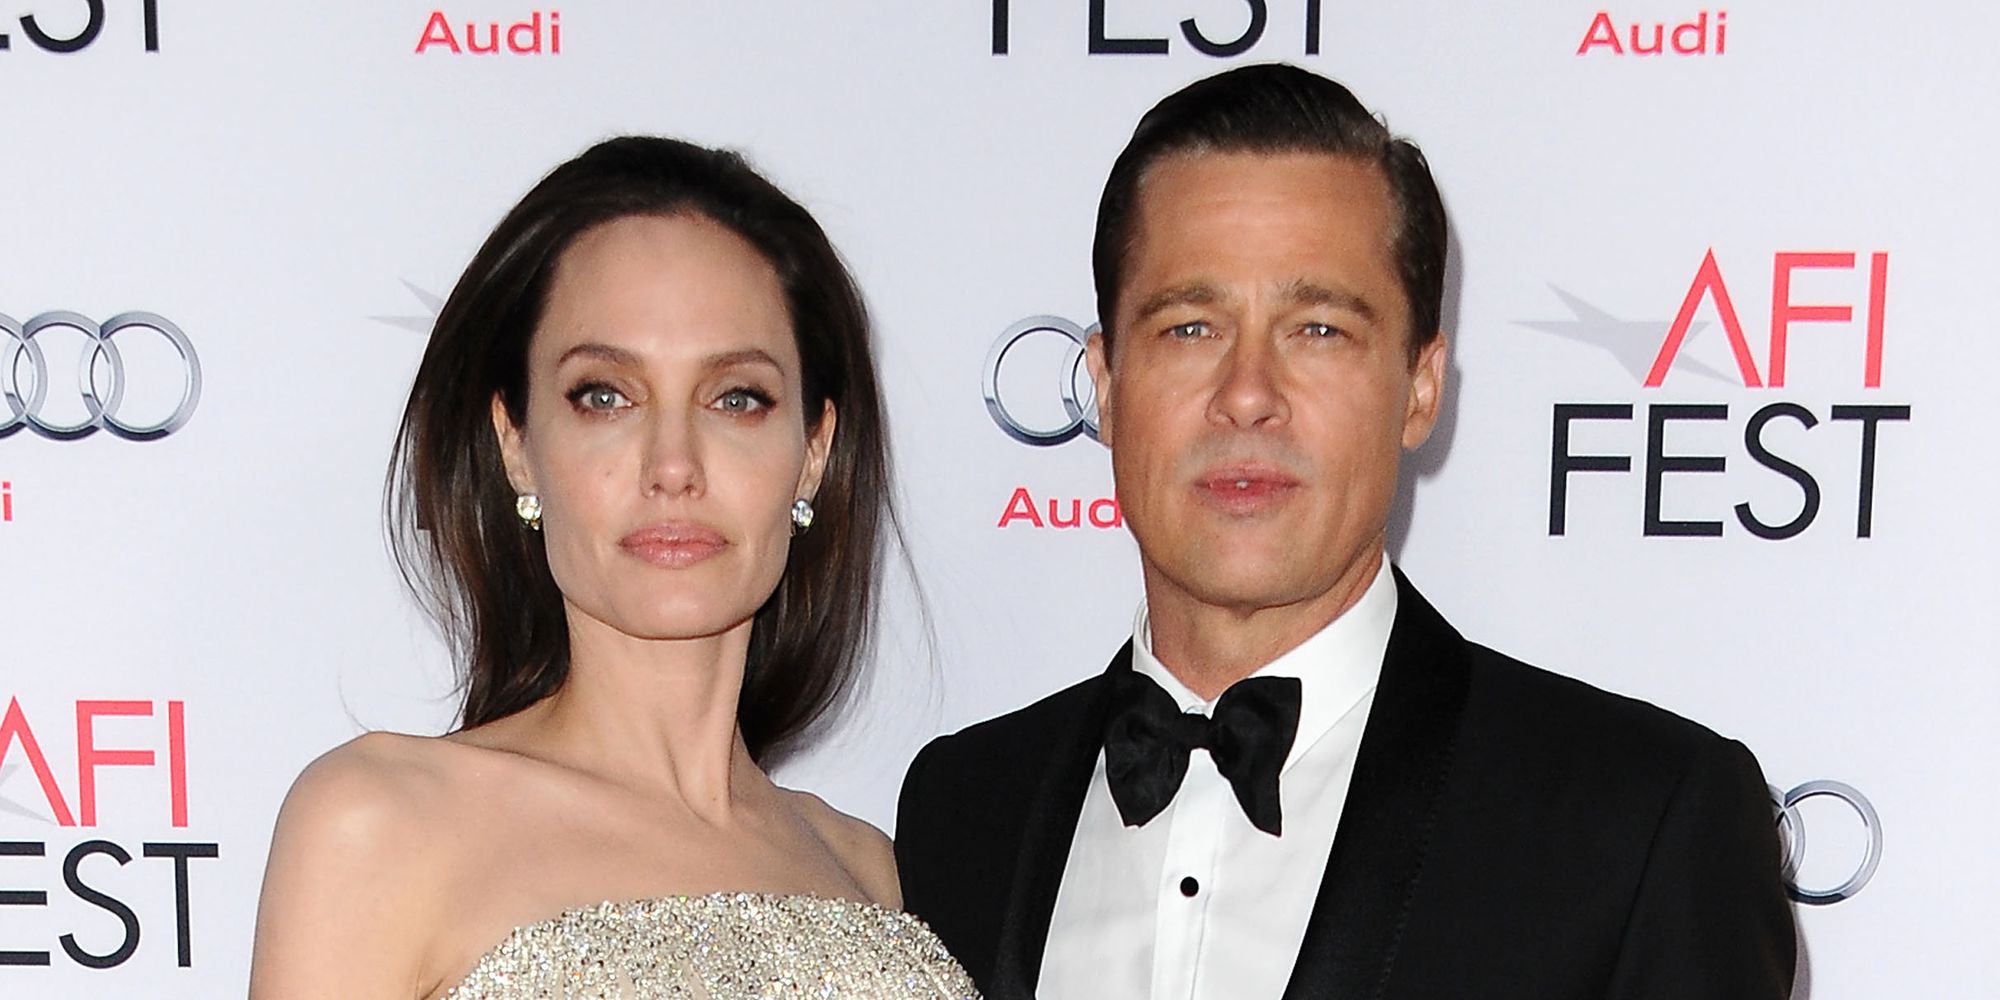 Angelina Jolie Files For Divorce From Brad Pitt | The Huffington Post2000 x 1000